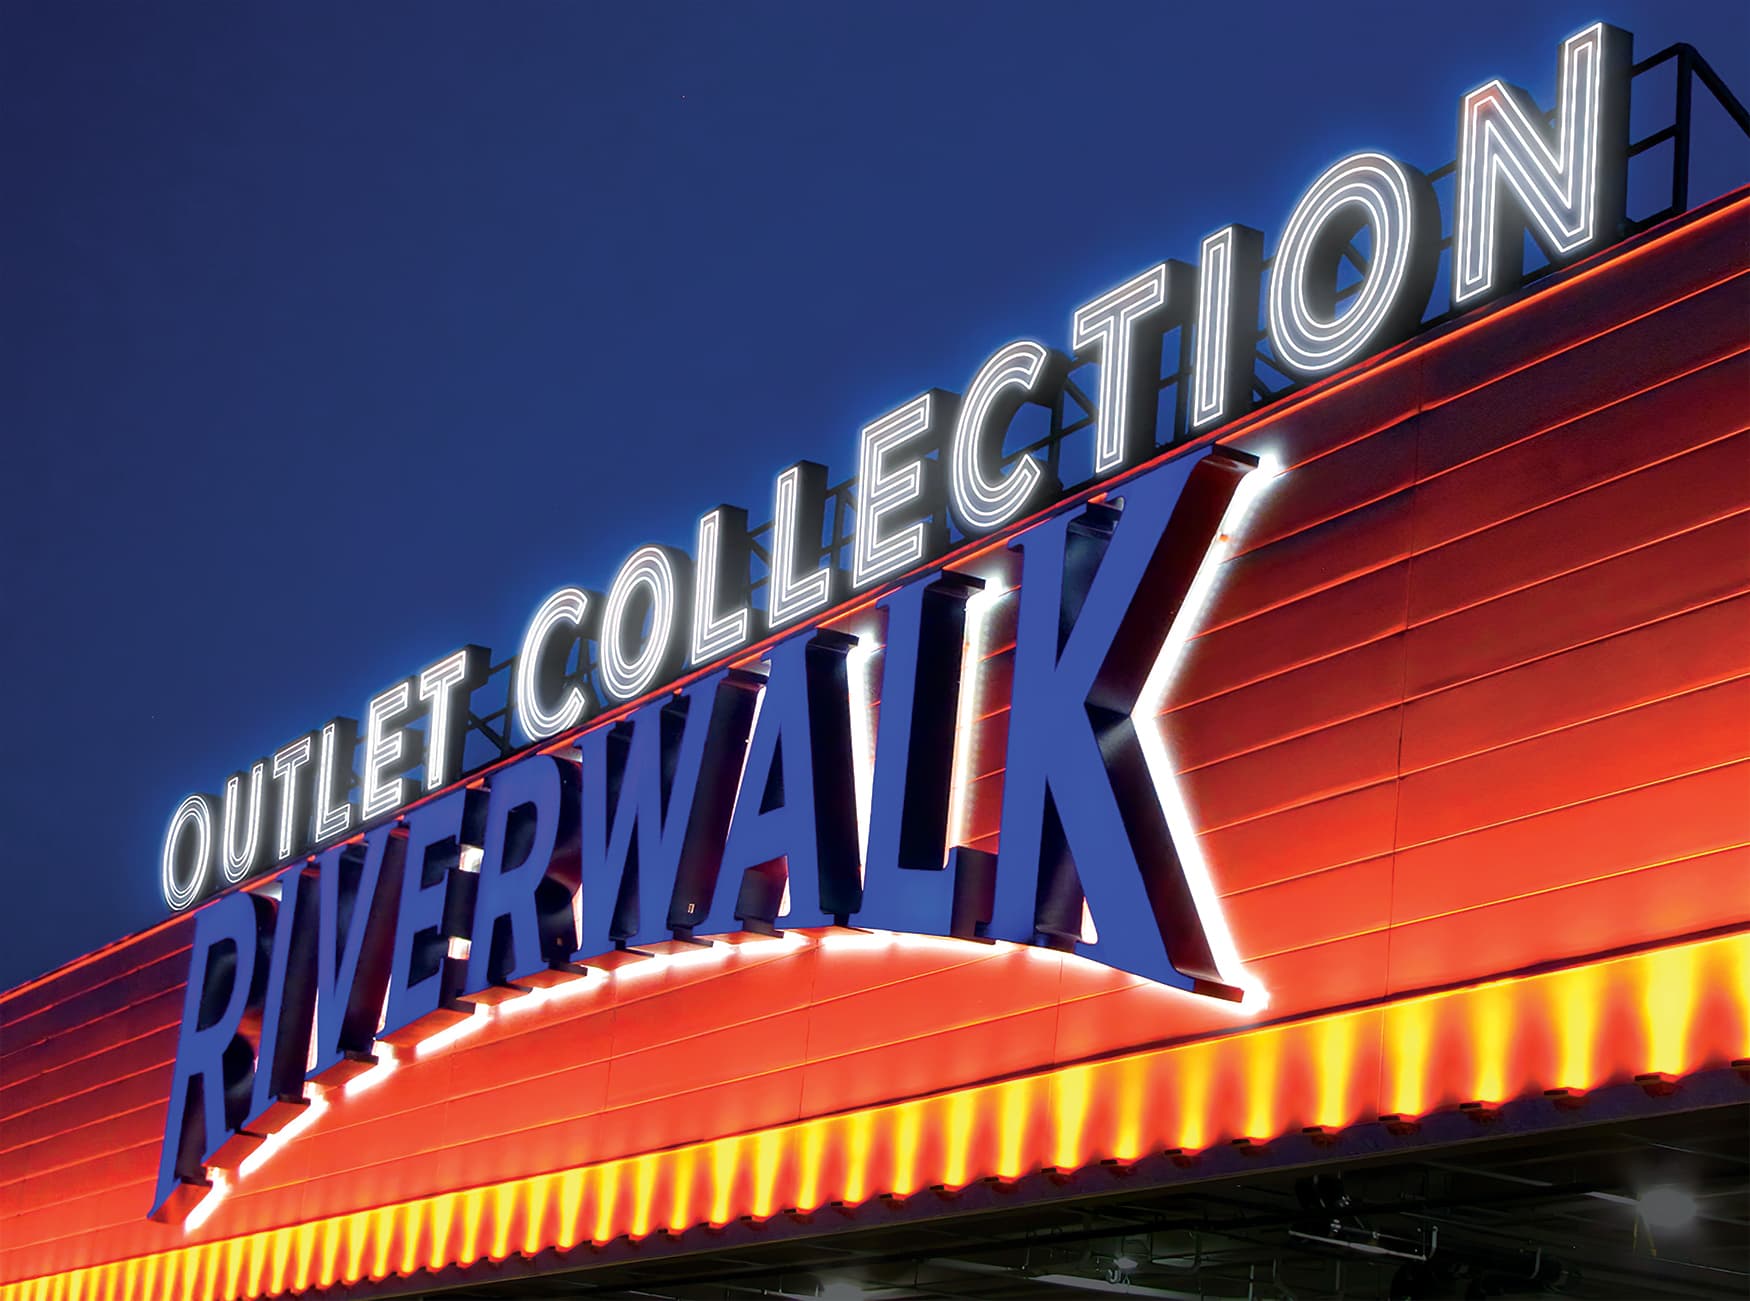 The Outlet Collection at Riverwalk. Face-Illuminated Rooftop Signage. Project Identity Signage. 